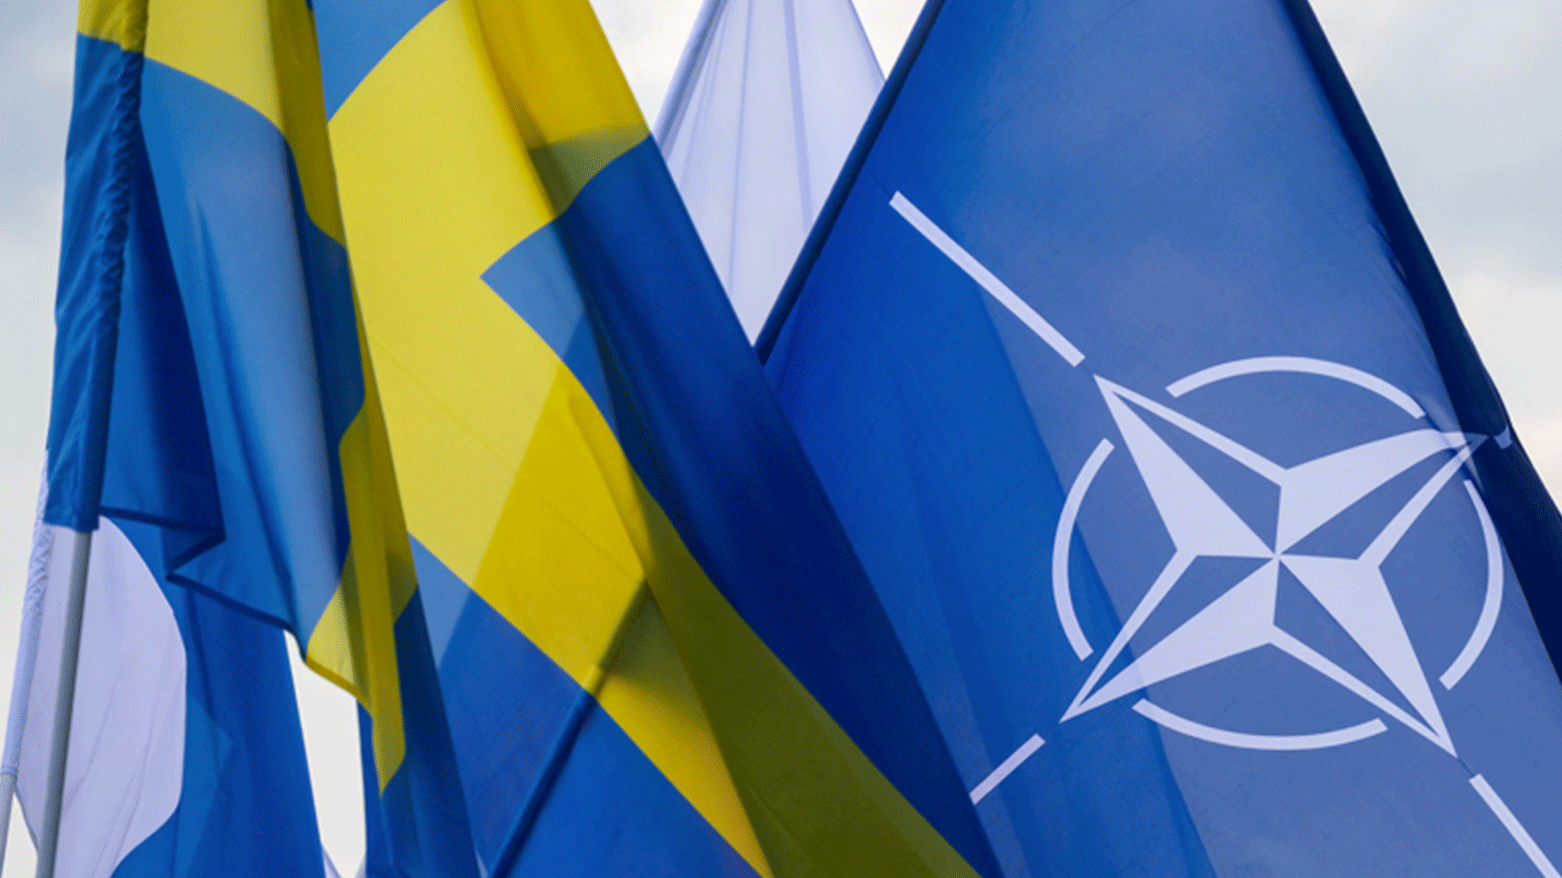 Swedish, and NATO flags are set up prior to the signing ceremony of the law ratifying the NATO Protocol on Finland and Sweden’s membership in Gdynia, Poland, in July 22. (Photo: AFP)